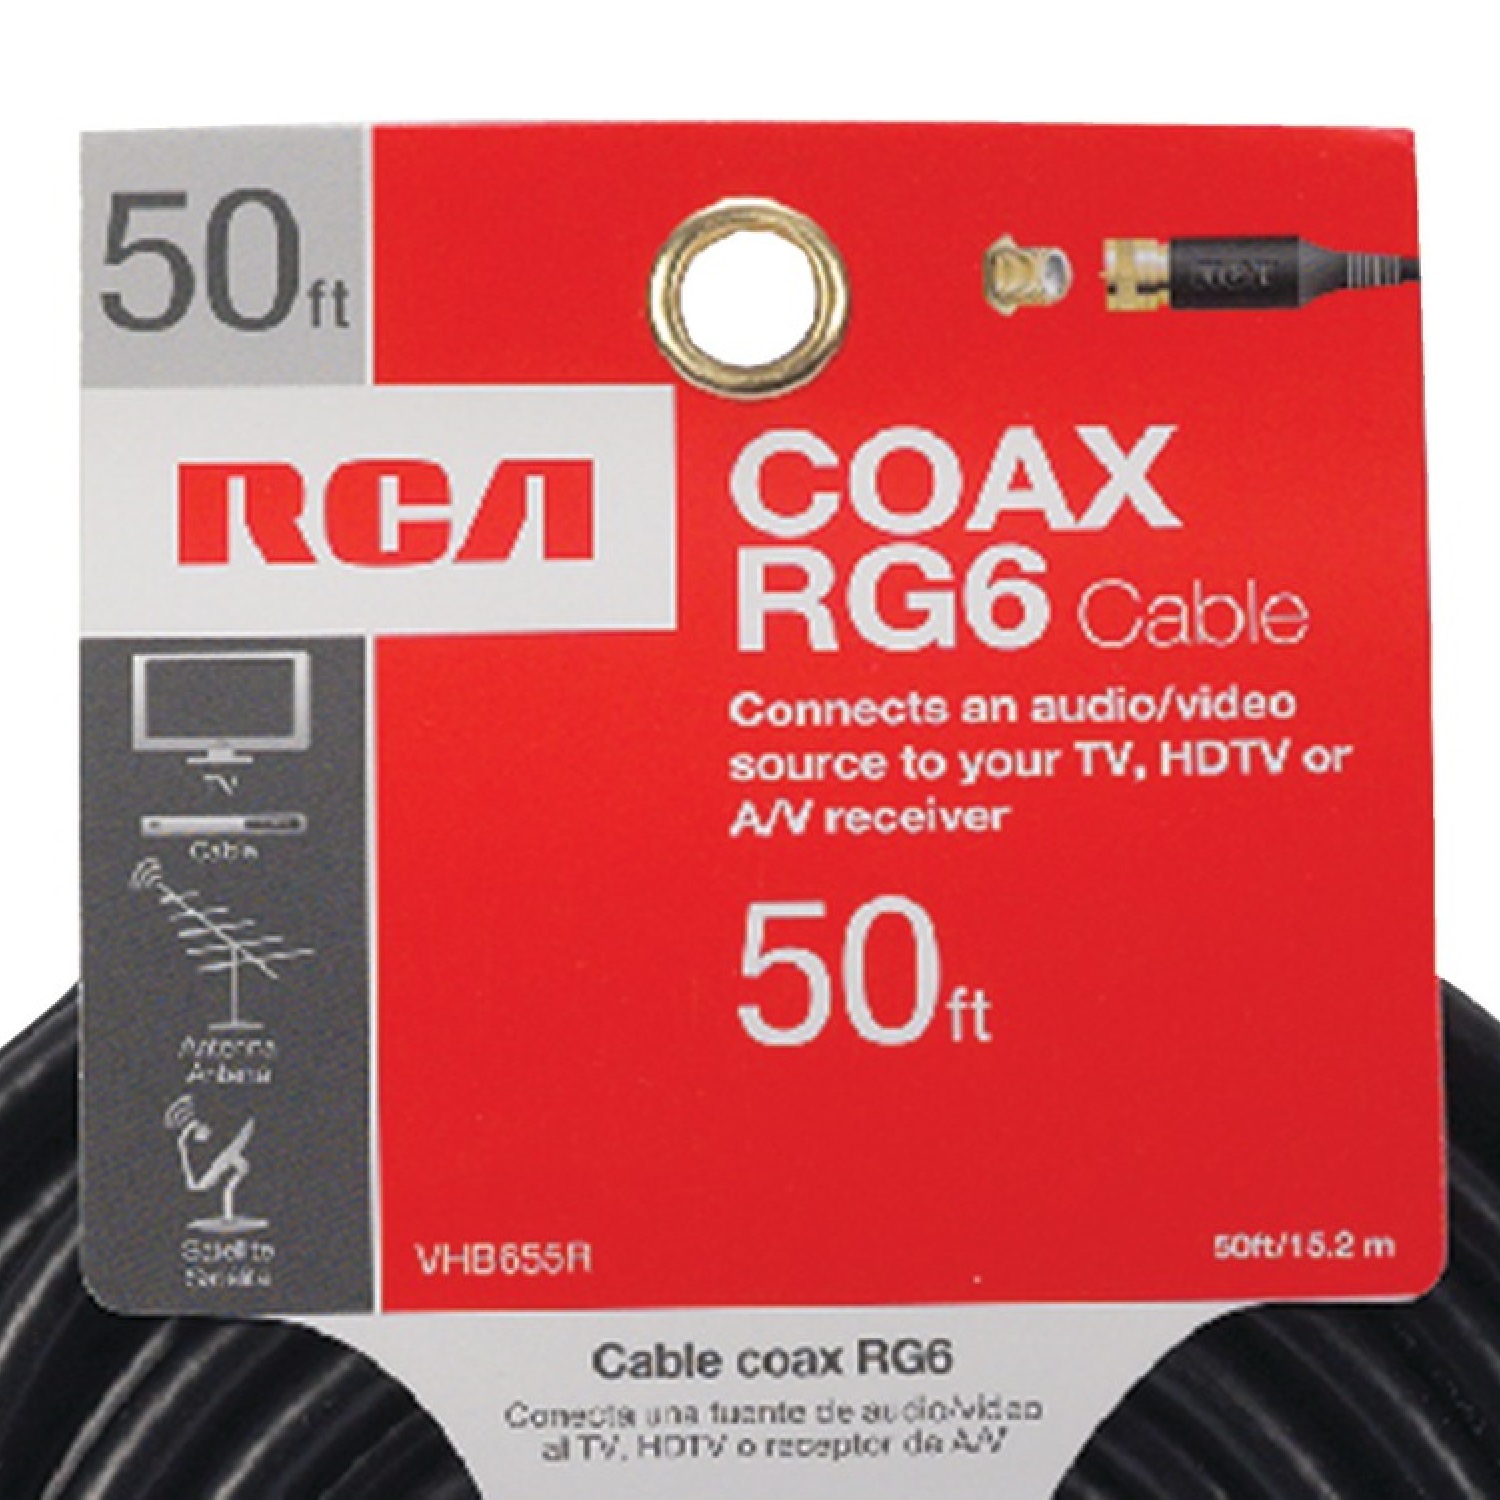 Rca Vhb655r Rg6 Coaxial Cable (50ft; Black) - image 3 of 3